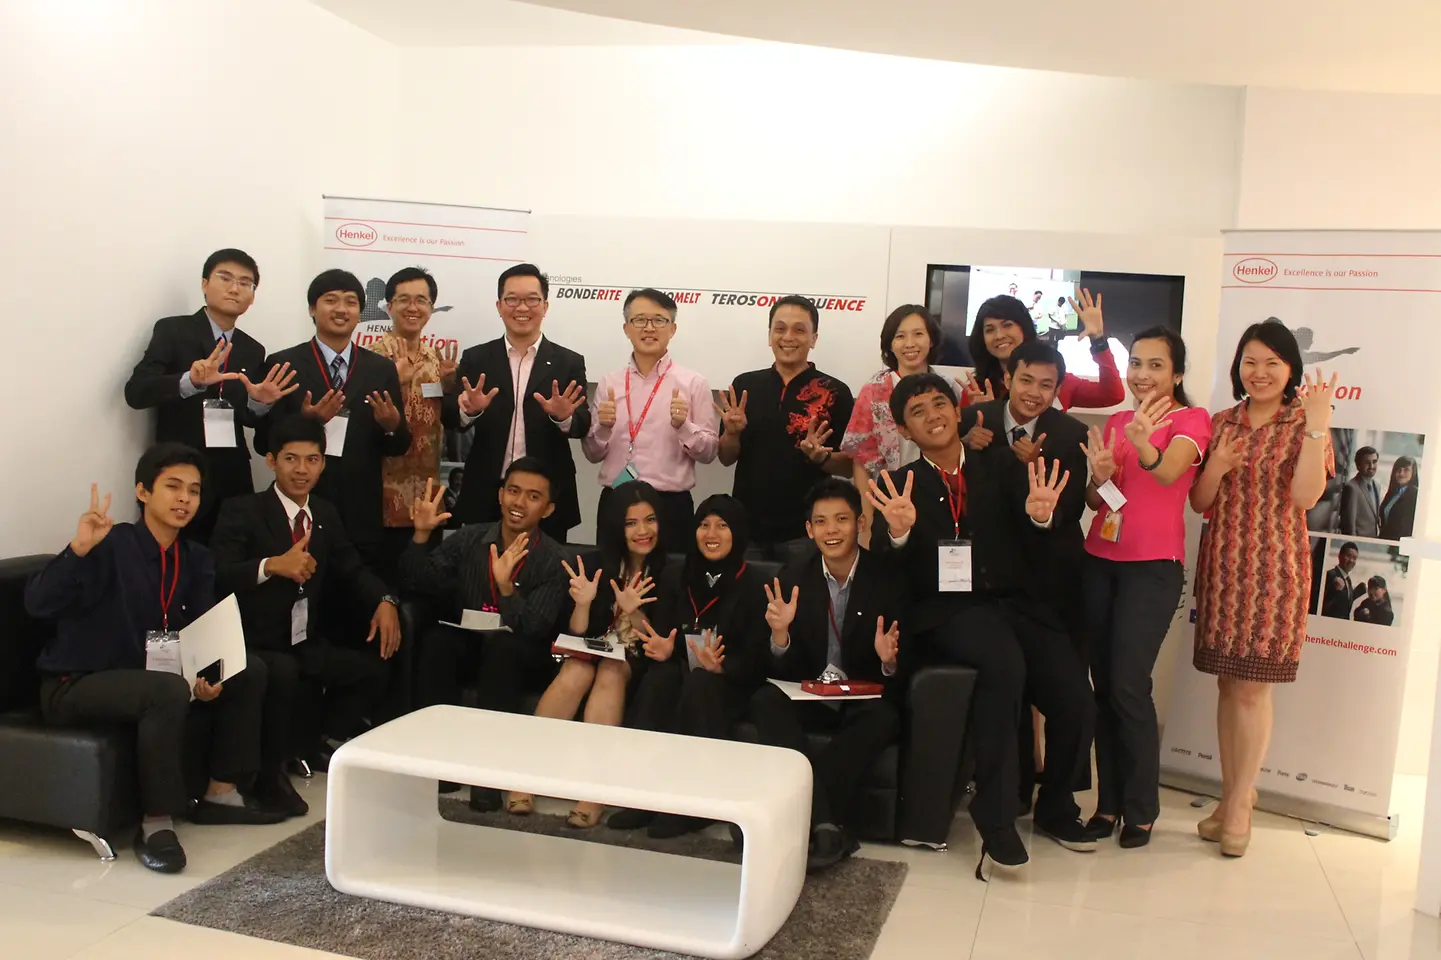 
Henkel employees and semi-finalists at the HIC Indonesia semi-final event. Winners Ratih Siahaan (seated, fourth from left) and Hariawan Christophorus (seated, sixth from left) came up with the innovative idea of an ‘Eco-Dishwashing Wrapper